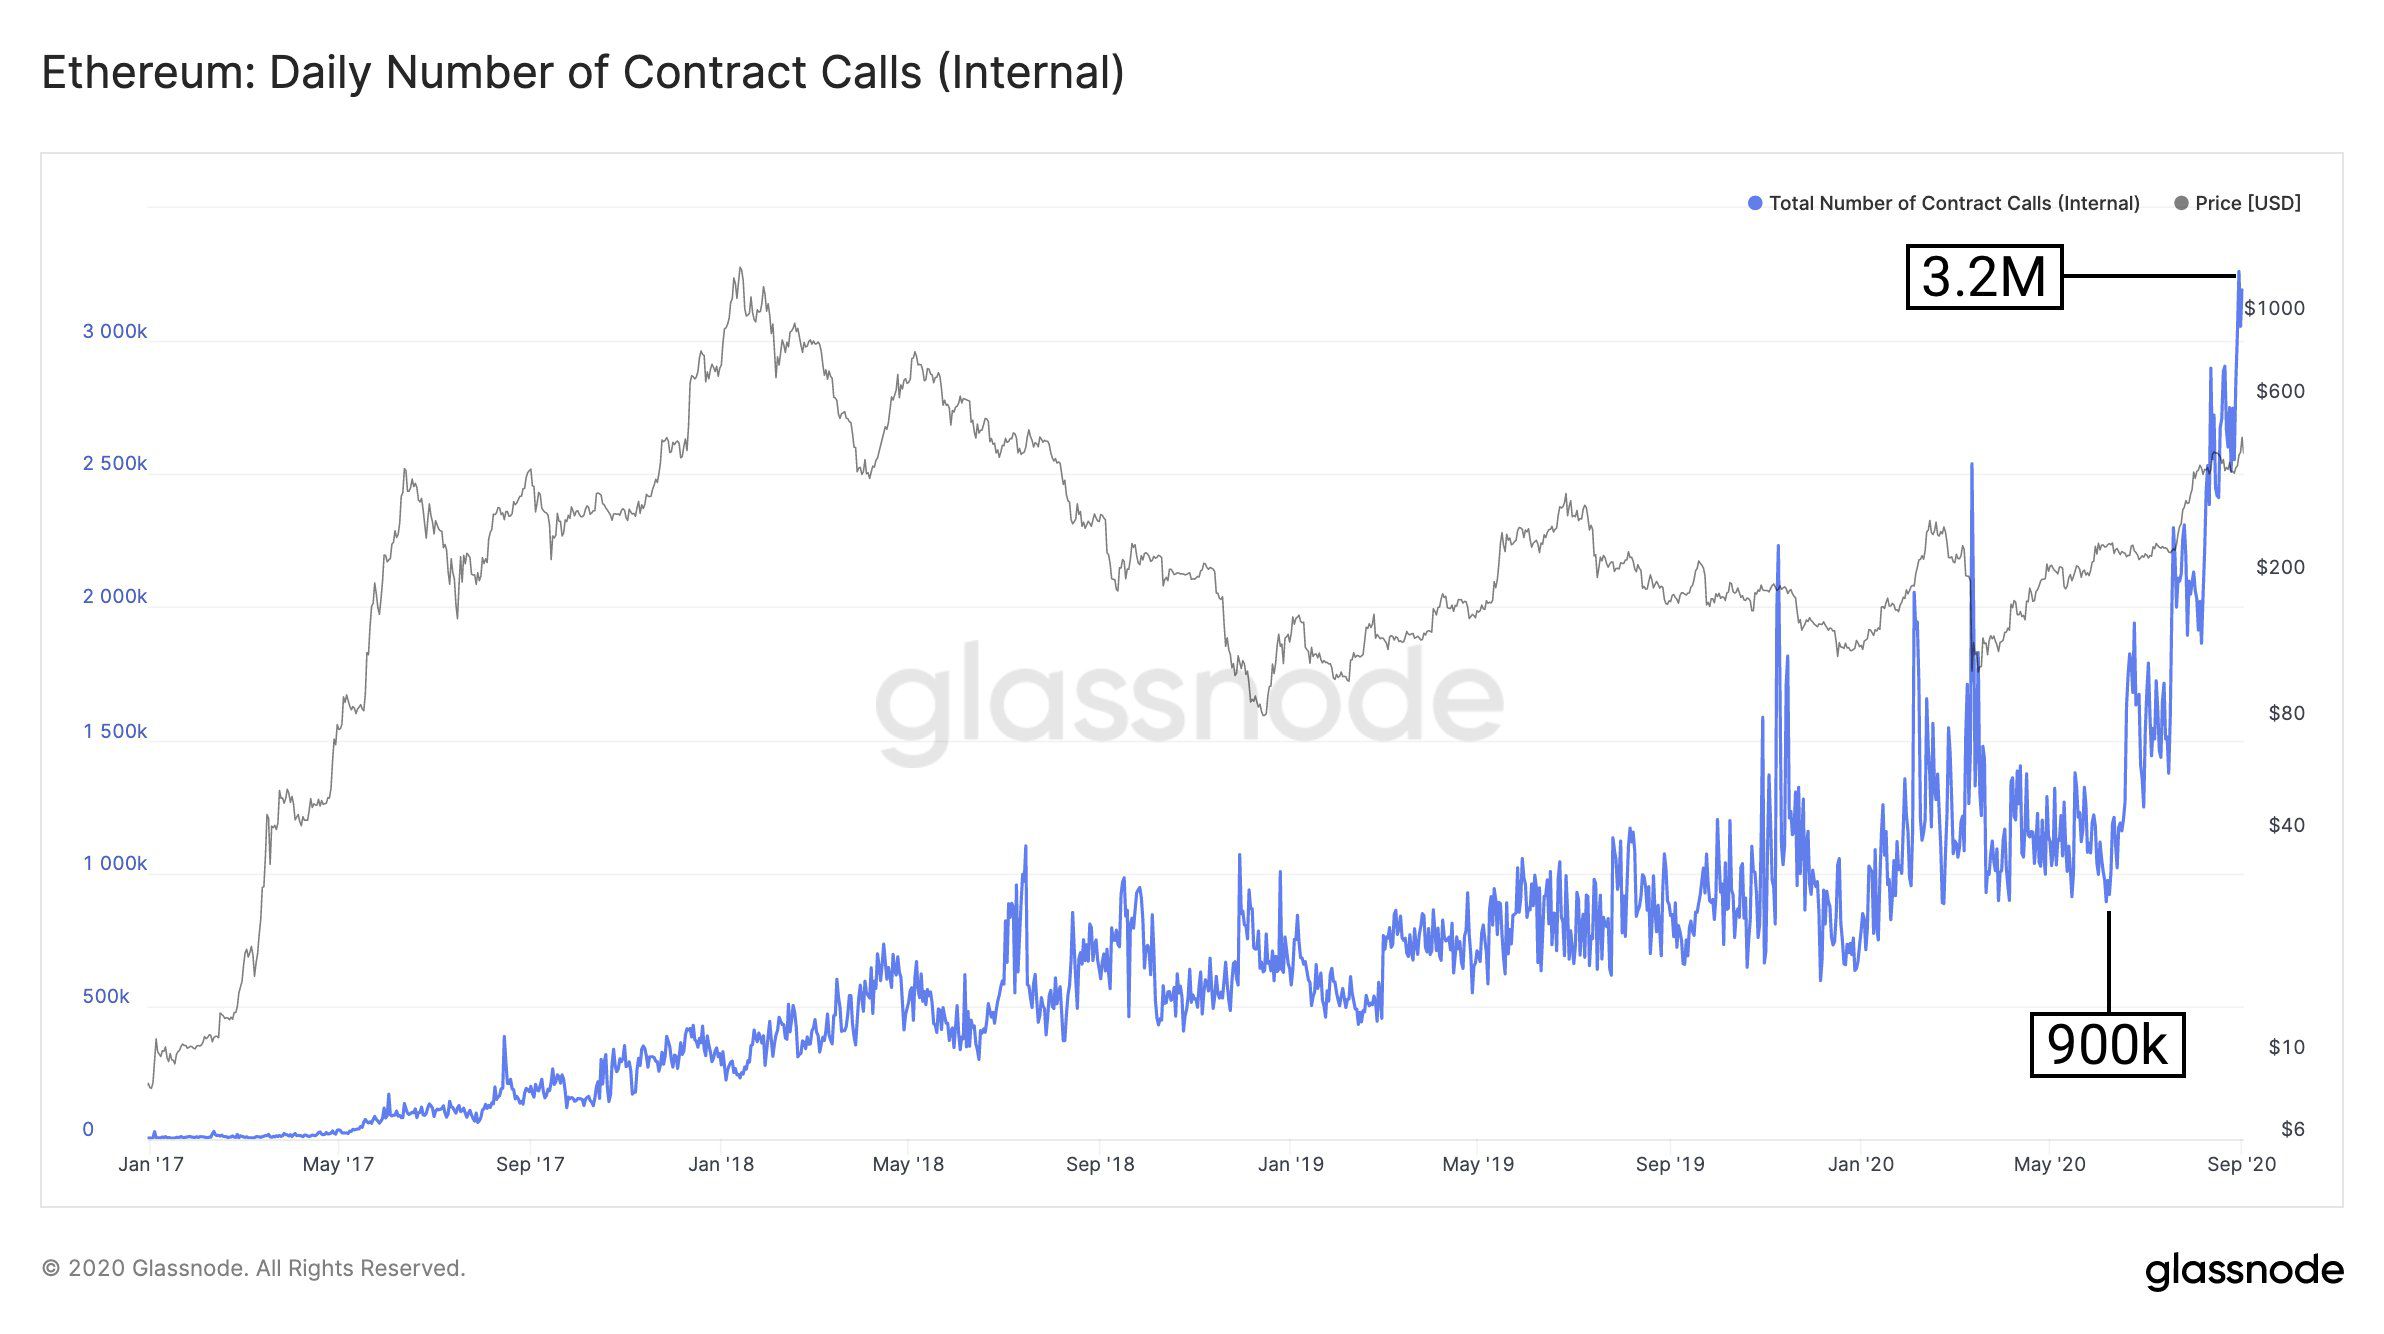 Internal Ethereum Contract Calls on a High